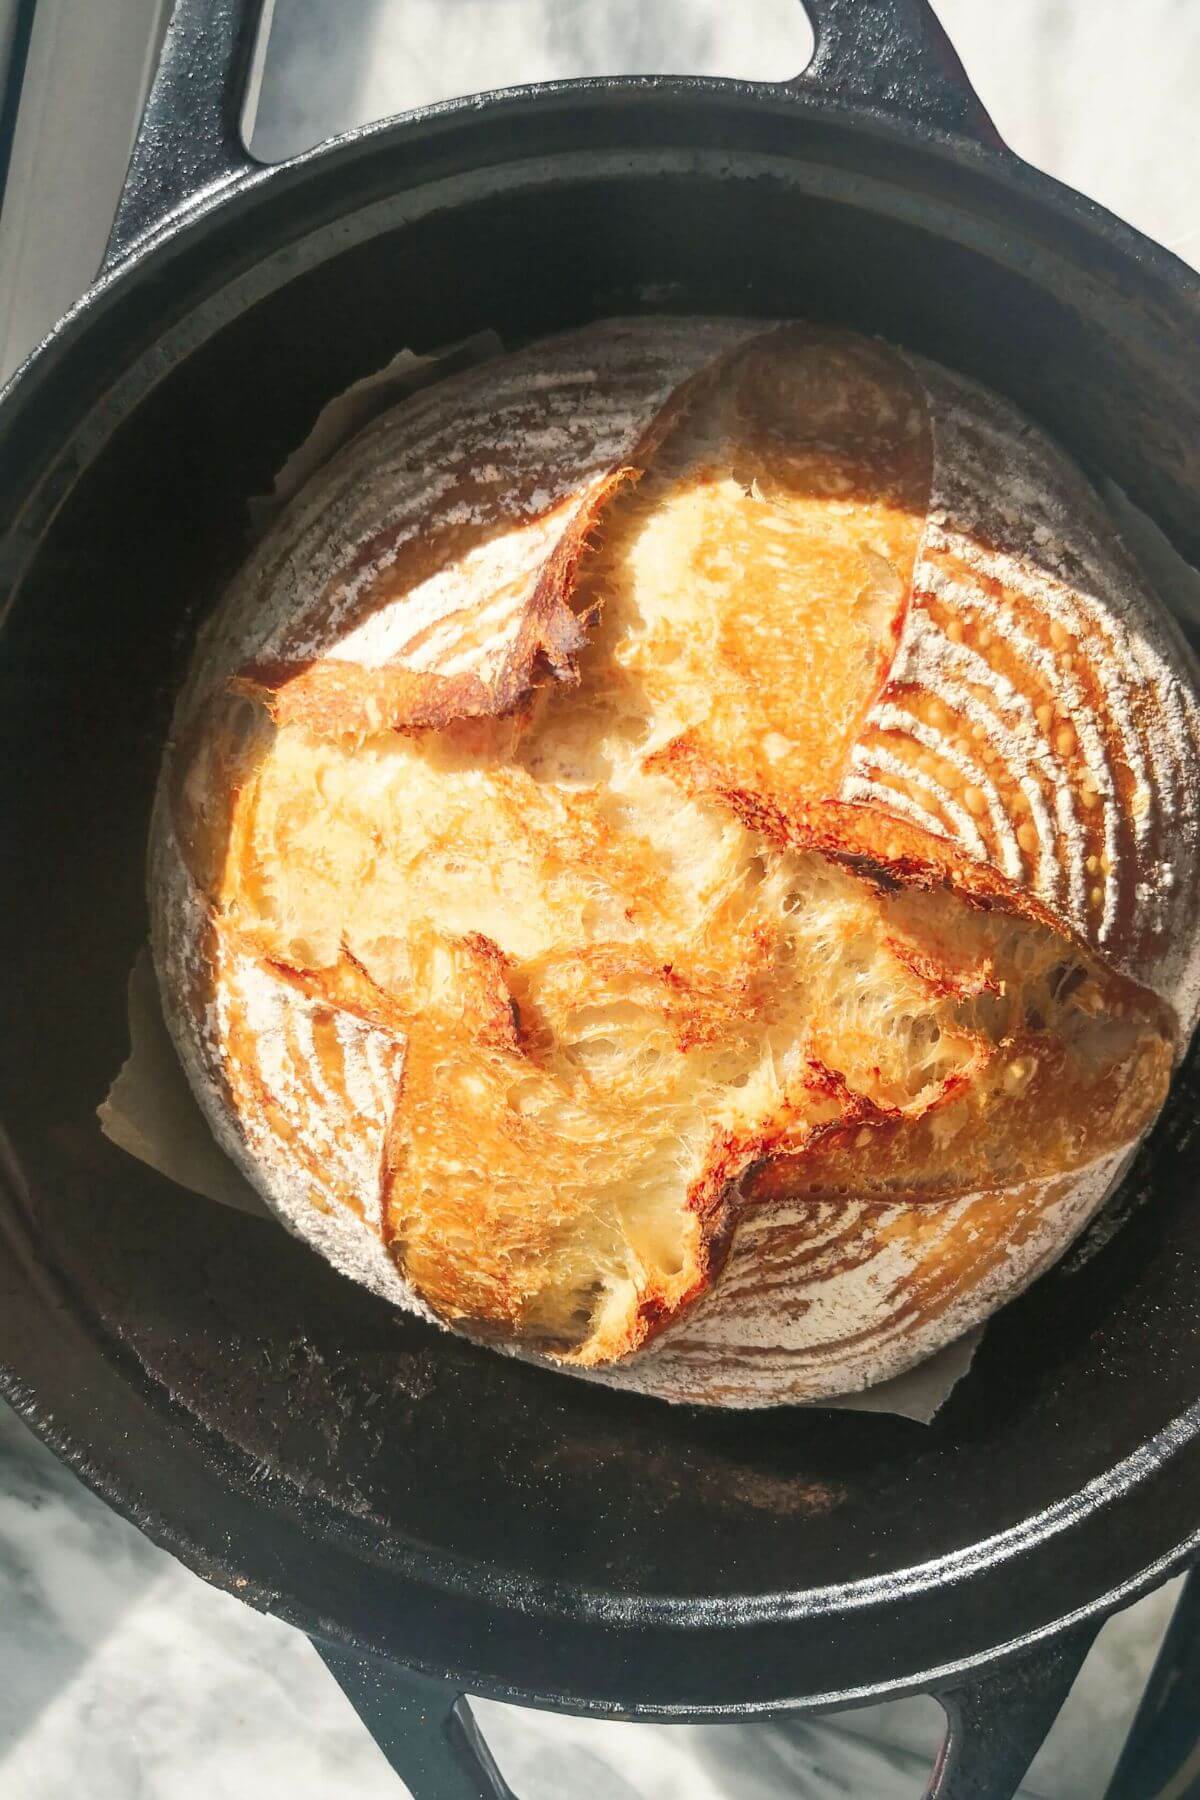 Golden baked bread in a black cast iron pot.